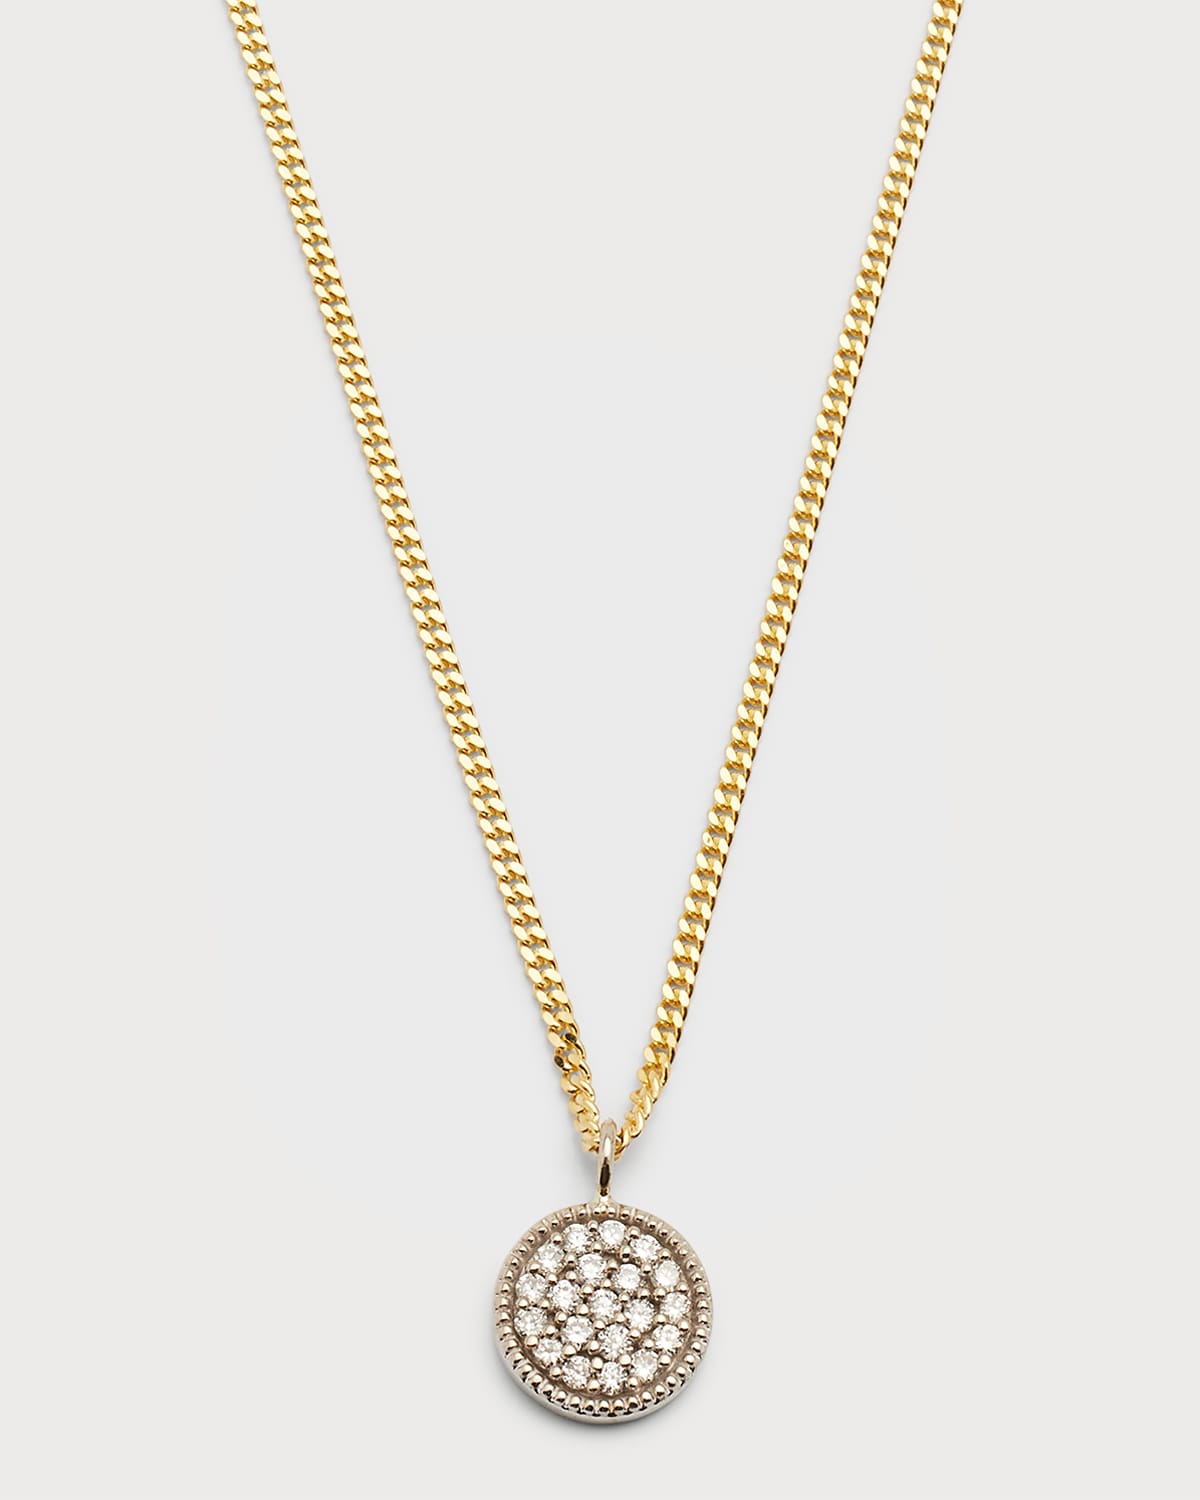 Poppy Finch Gourmet Chain Necklace W/ Diamond Pave Pendant In Gold